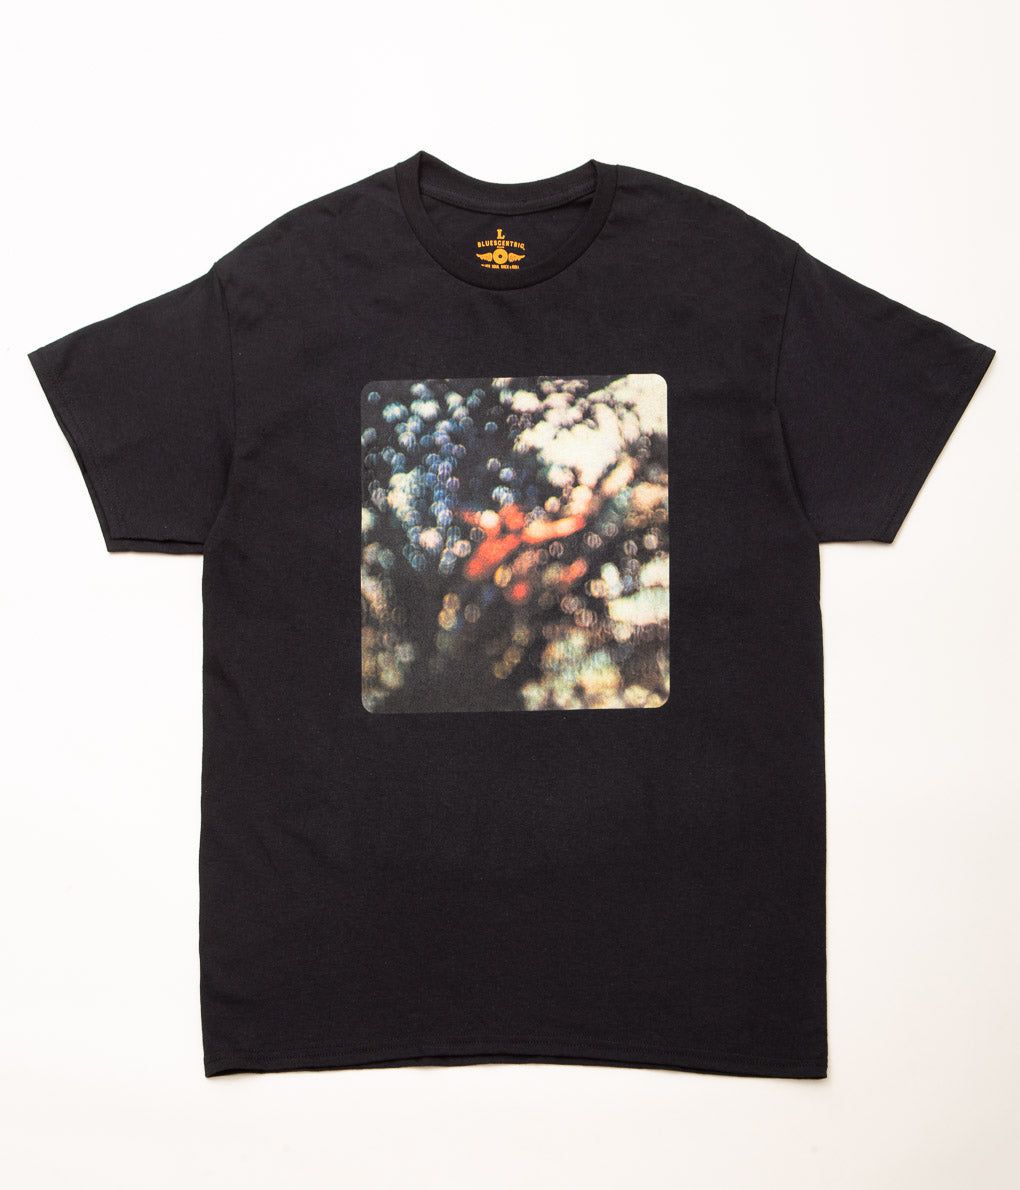 BLUESCENTRIC 039 039 PINK FLOYD OBSCURED BY CLOUDS T-SHIRT 039 039 (BLACK)